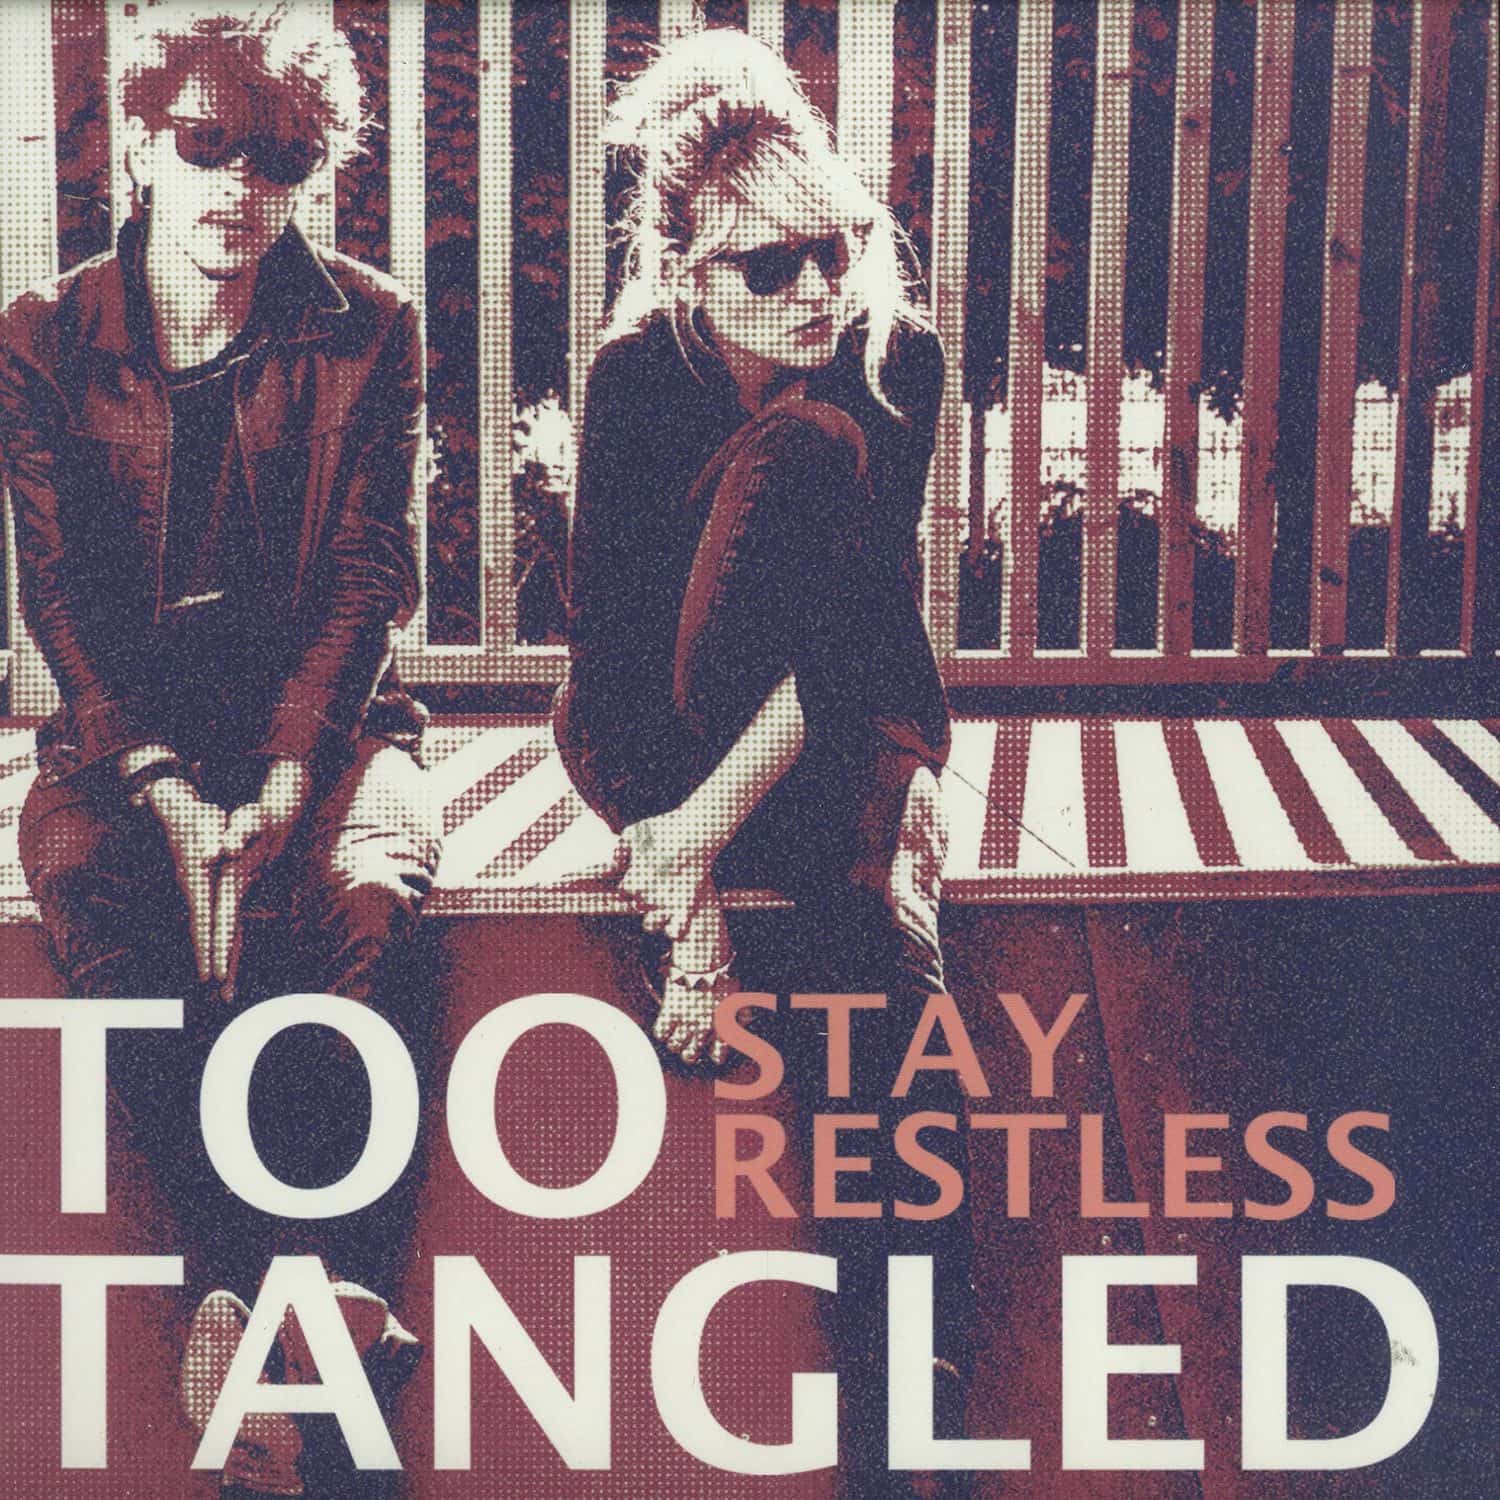 Too Tangled - STAY RESTLESS 